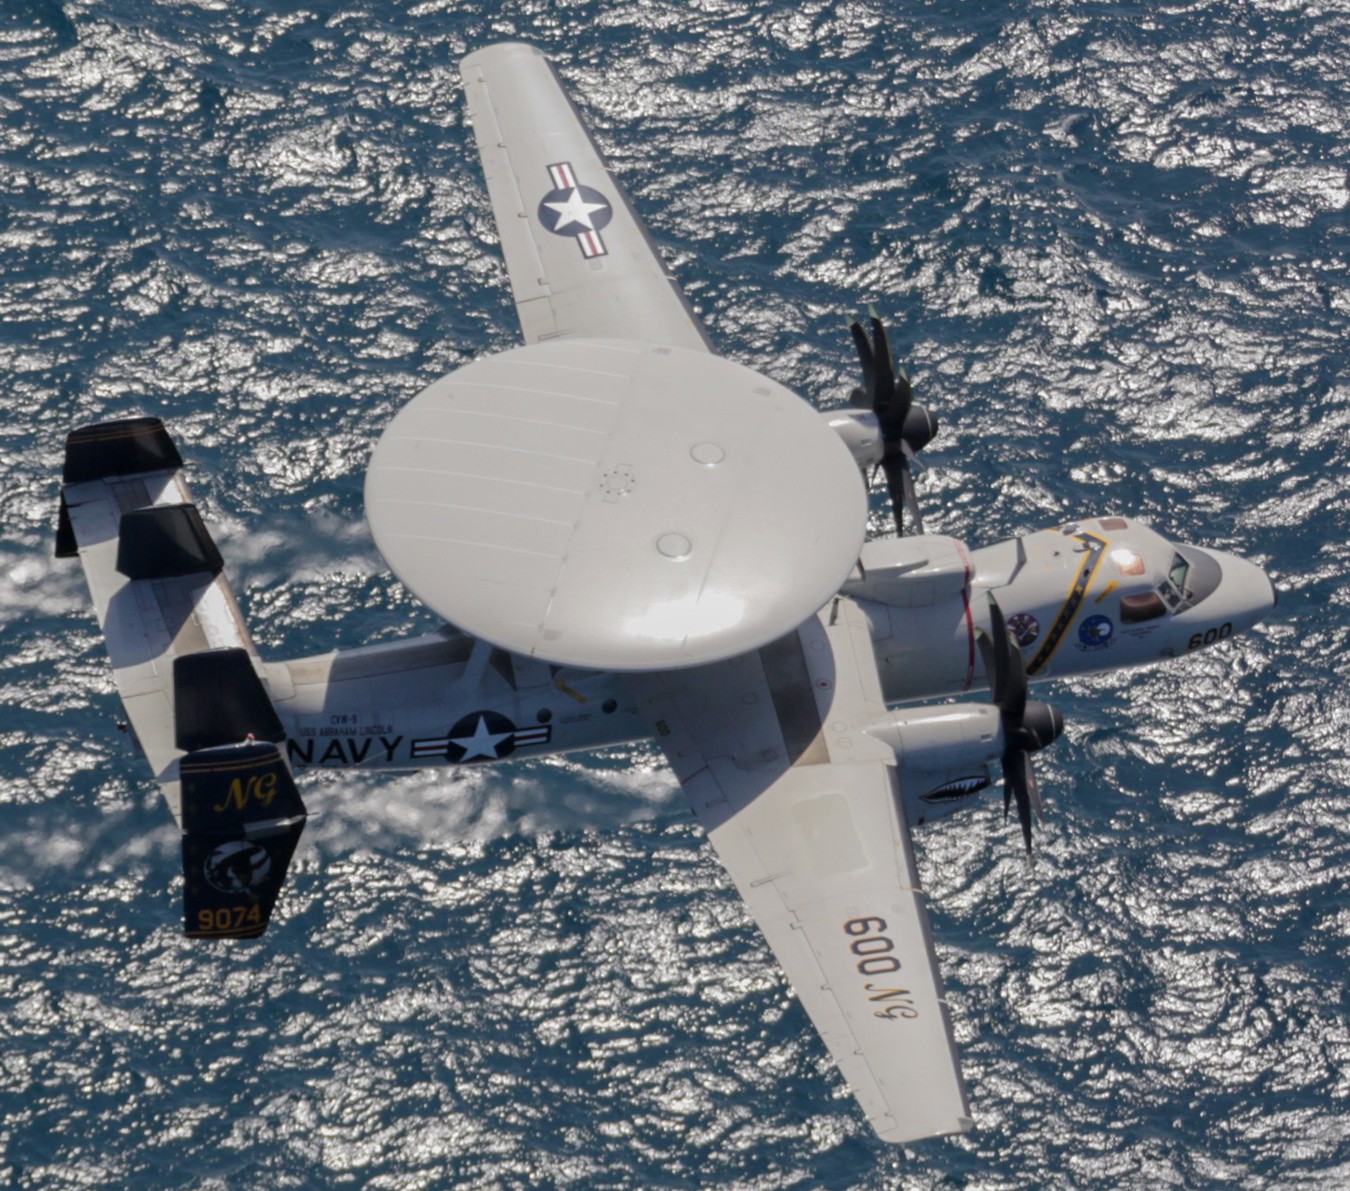 vaw-117 wallbangers airborne command and control squadron navy e-2d advanced hawkeye cvw-9 uss abraham lincoln cvn-72 21